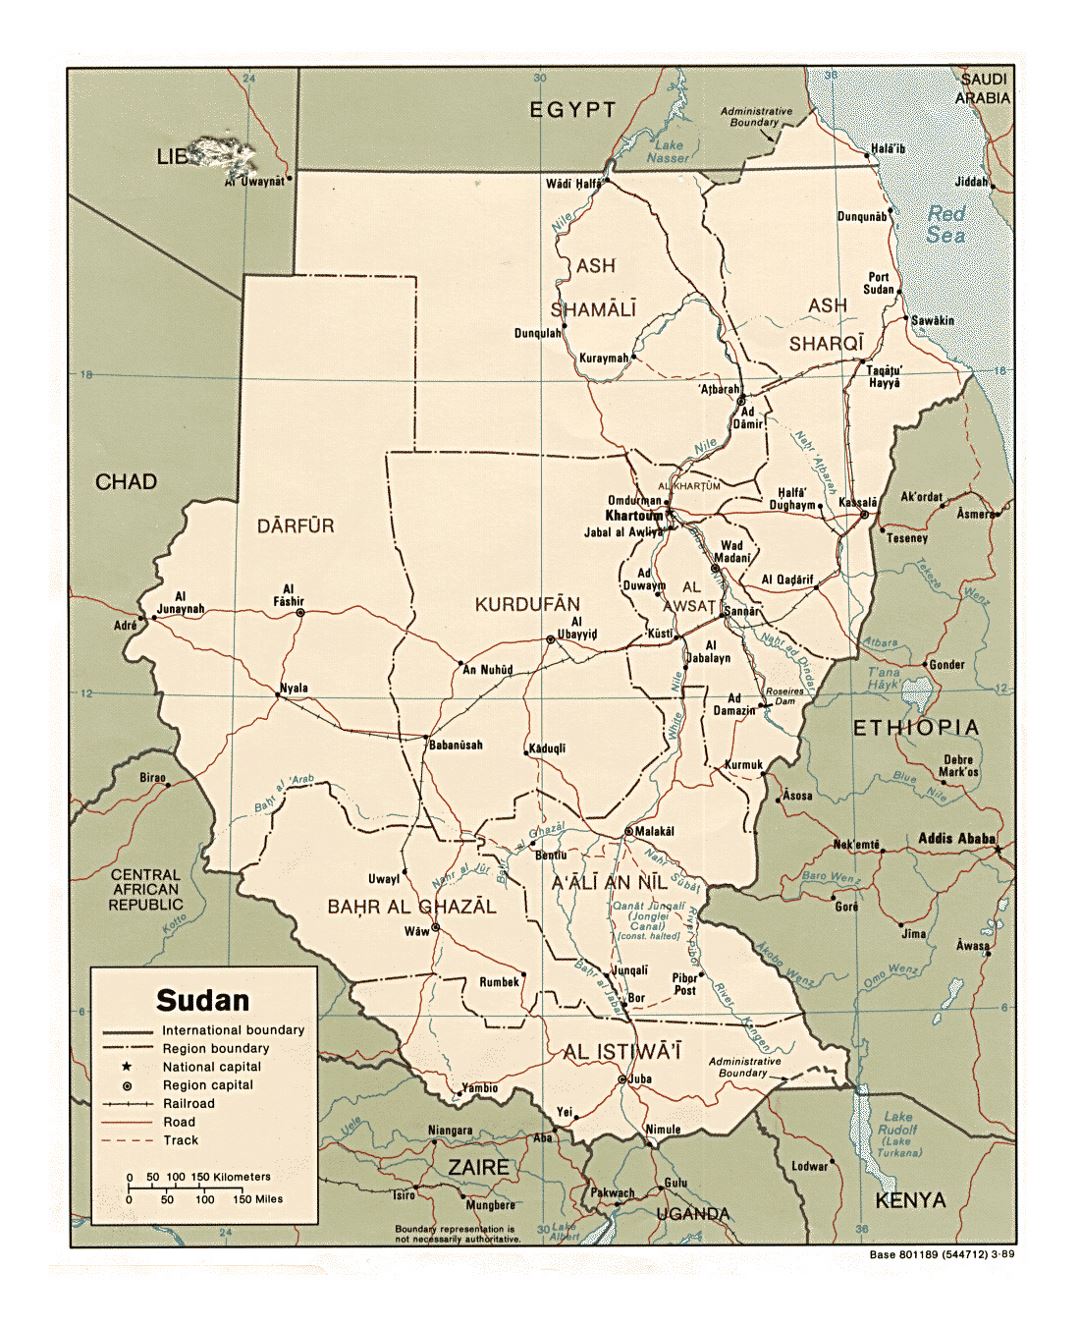 Detailed political and administrative map of Sudan with roads, railroads and major cities - 1989